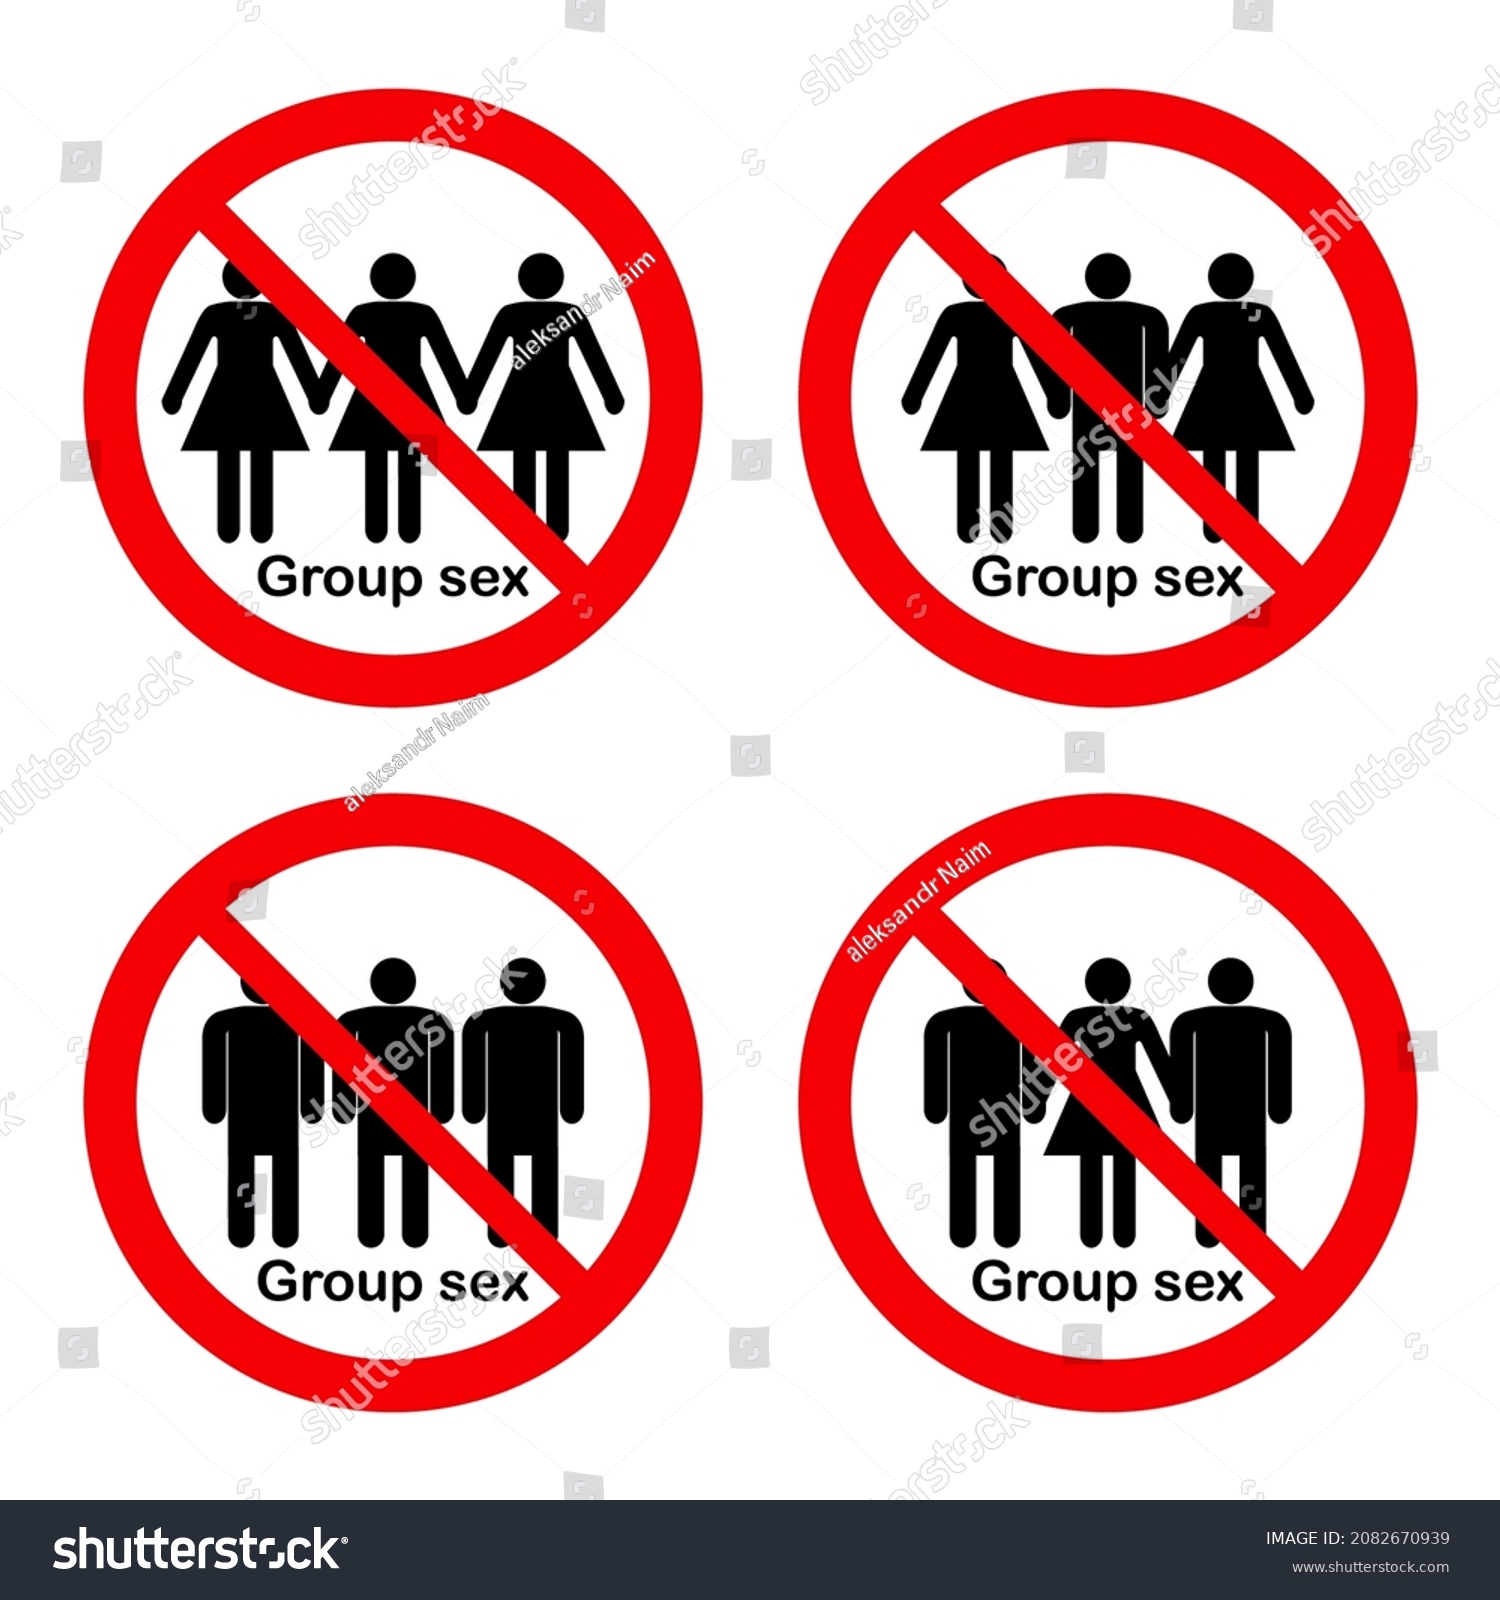 No Group Sex Red Round Prohibition Stock Vector Royalty Free 2082670939 Shutterstock 